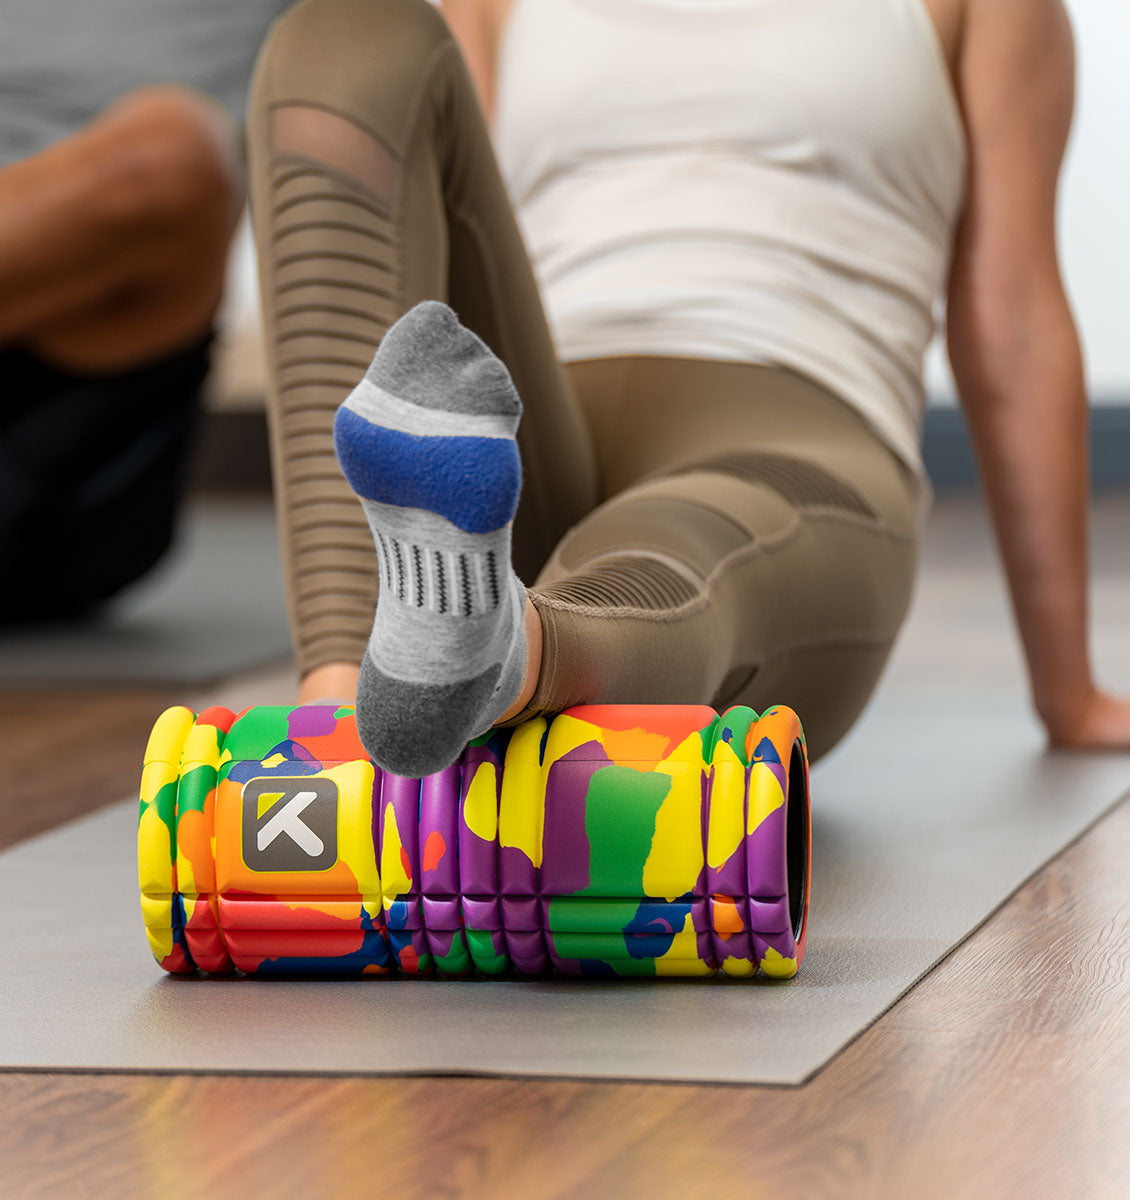 TriggerPoint The Grid 1.0 Foam Roller - Rainbow - Lifestyle - 1